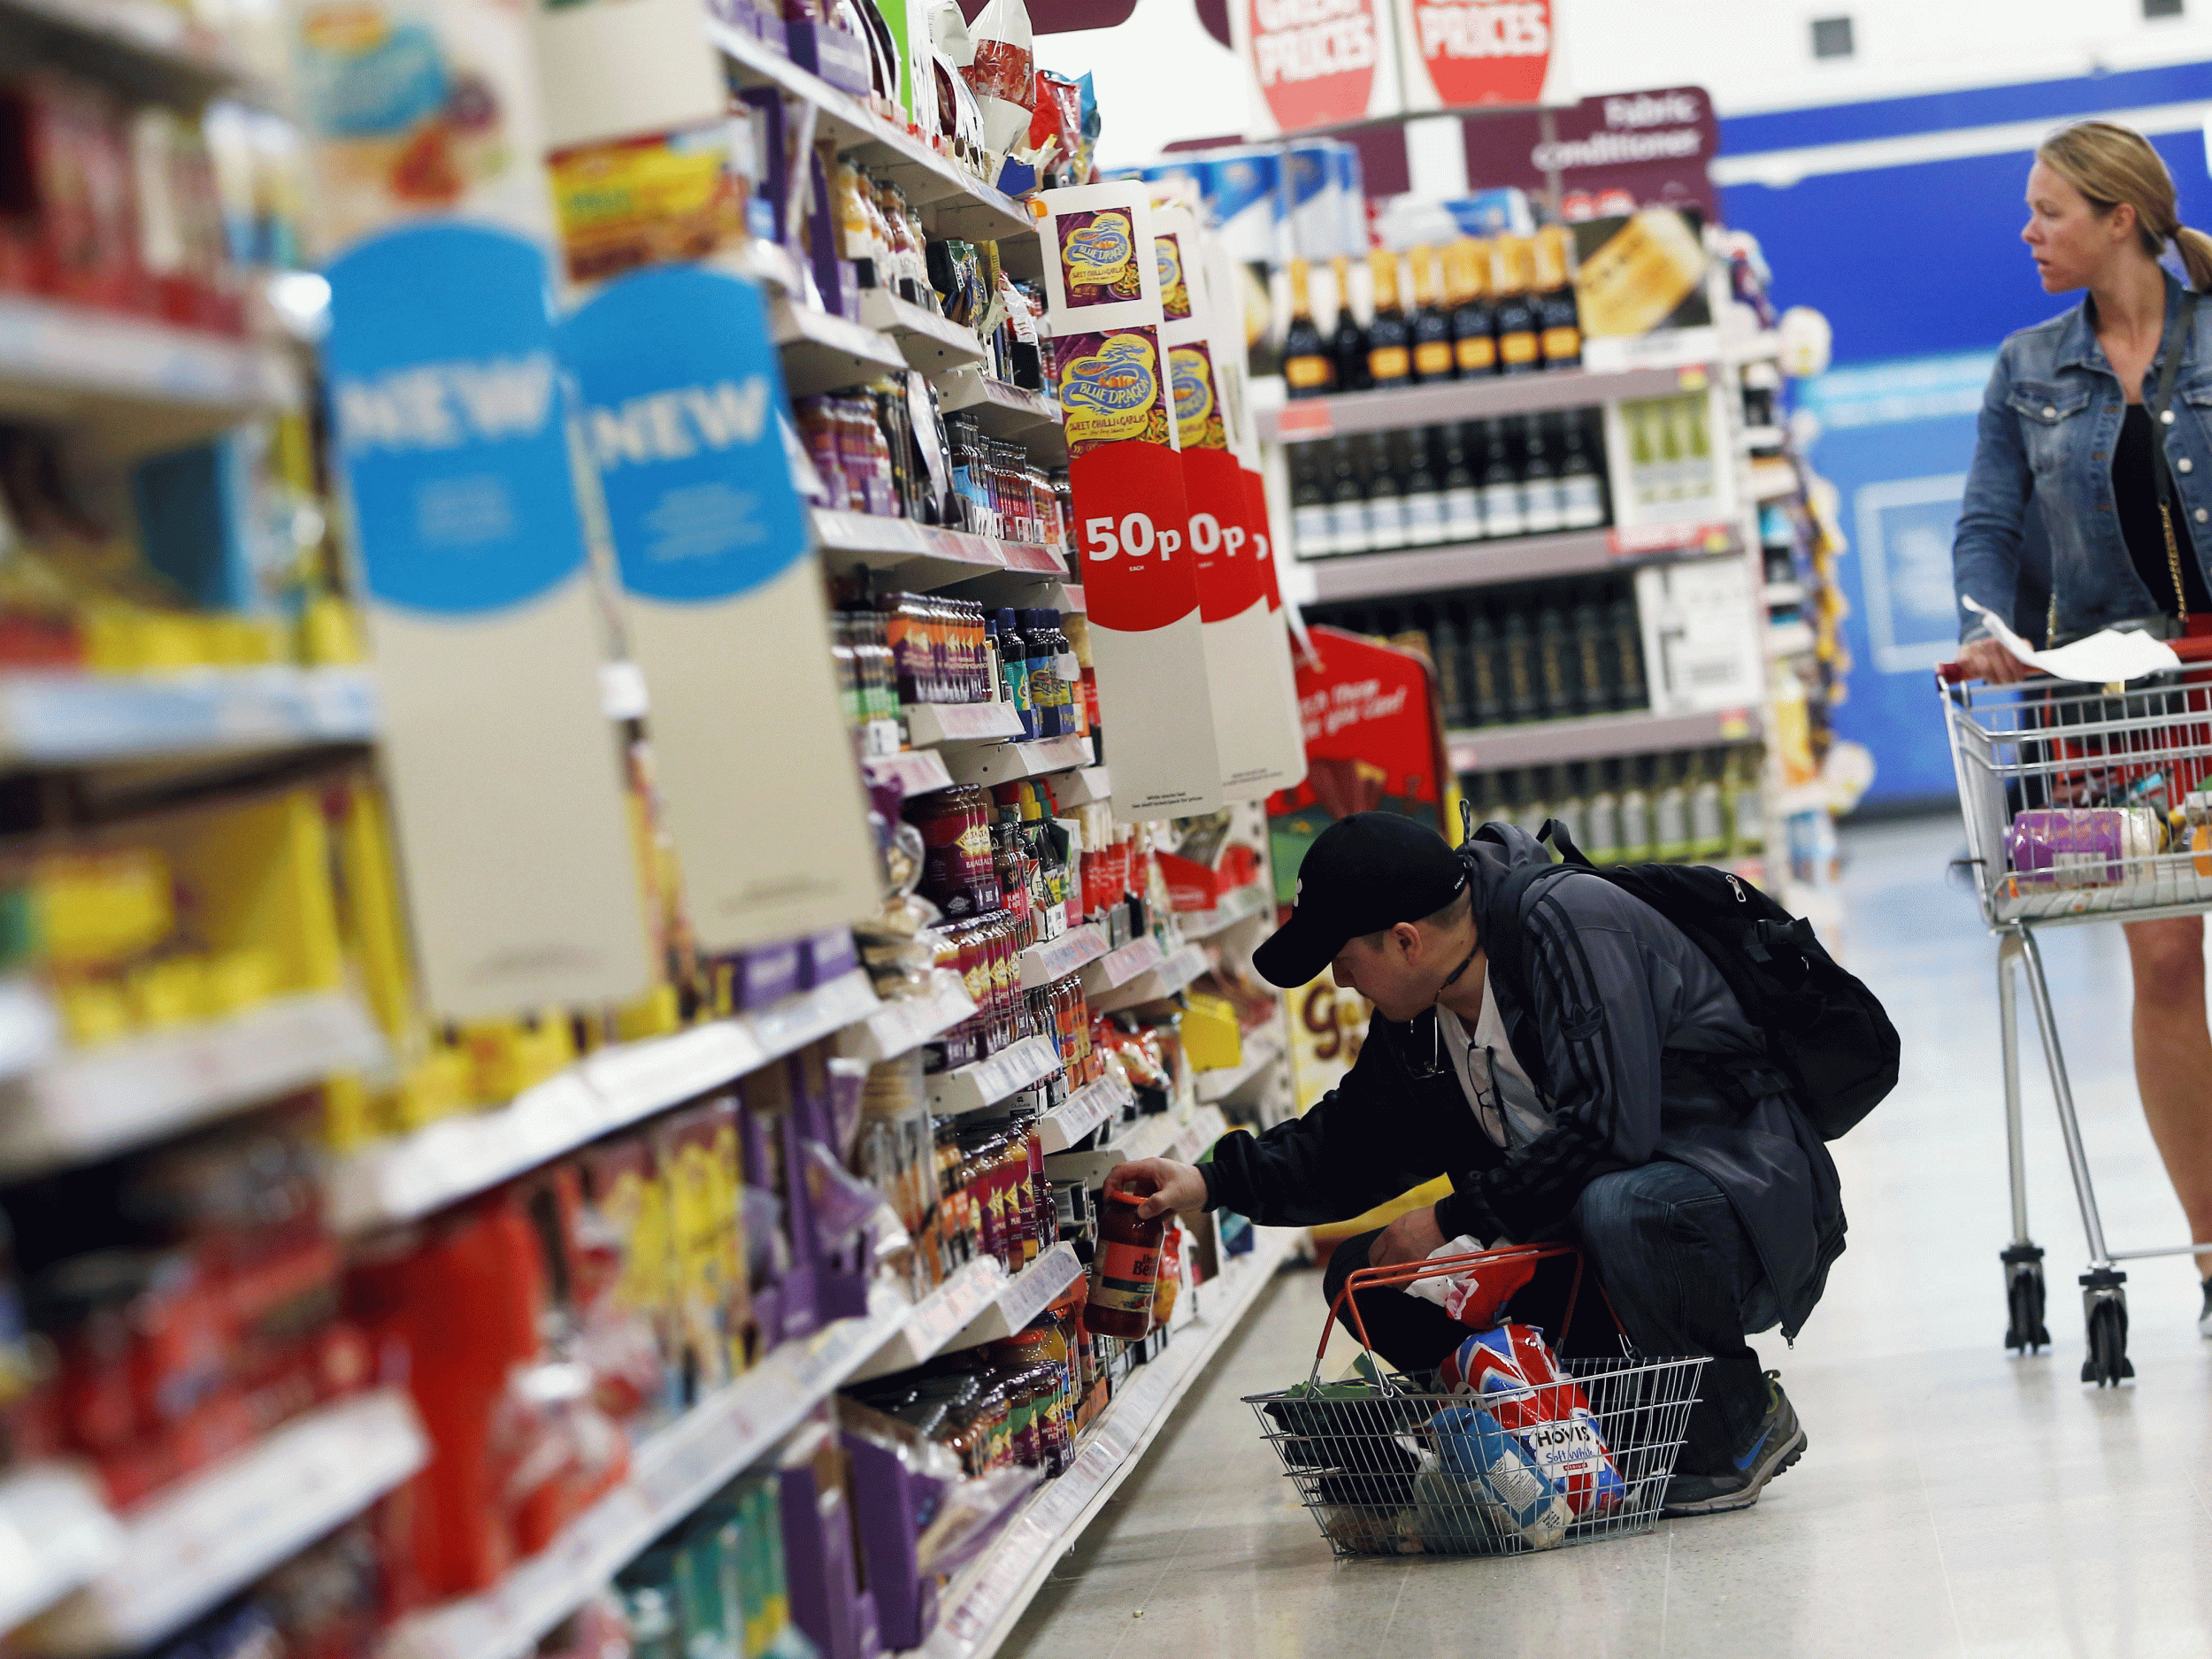 Retail sales growth plunges at fastest pace in over a year